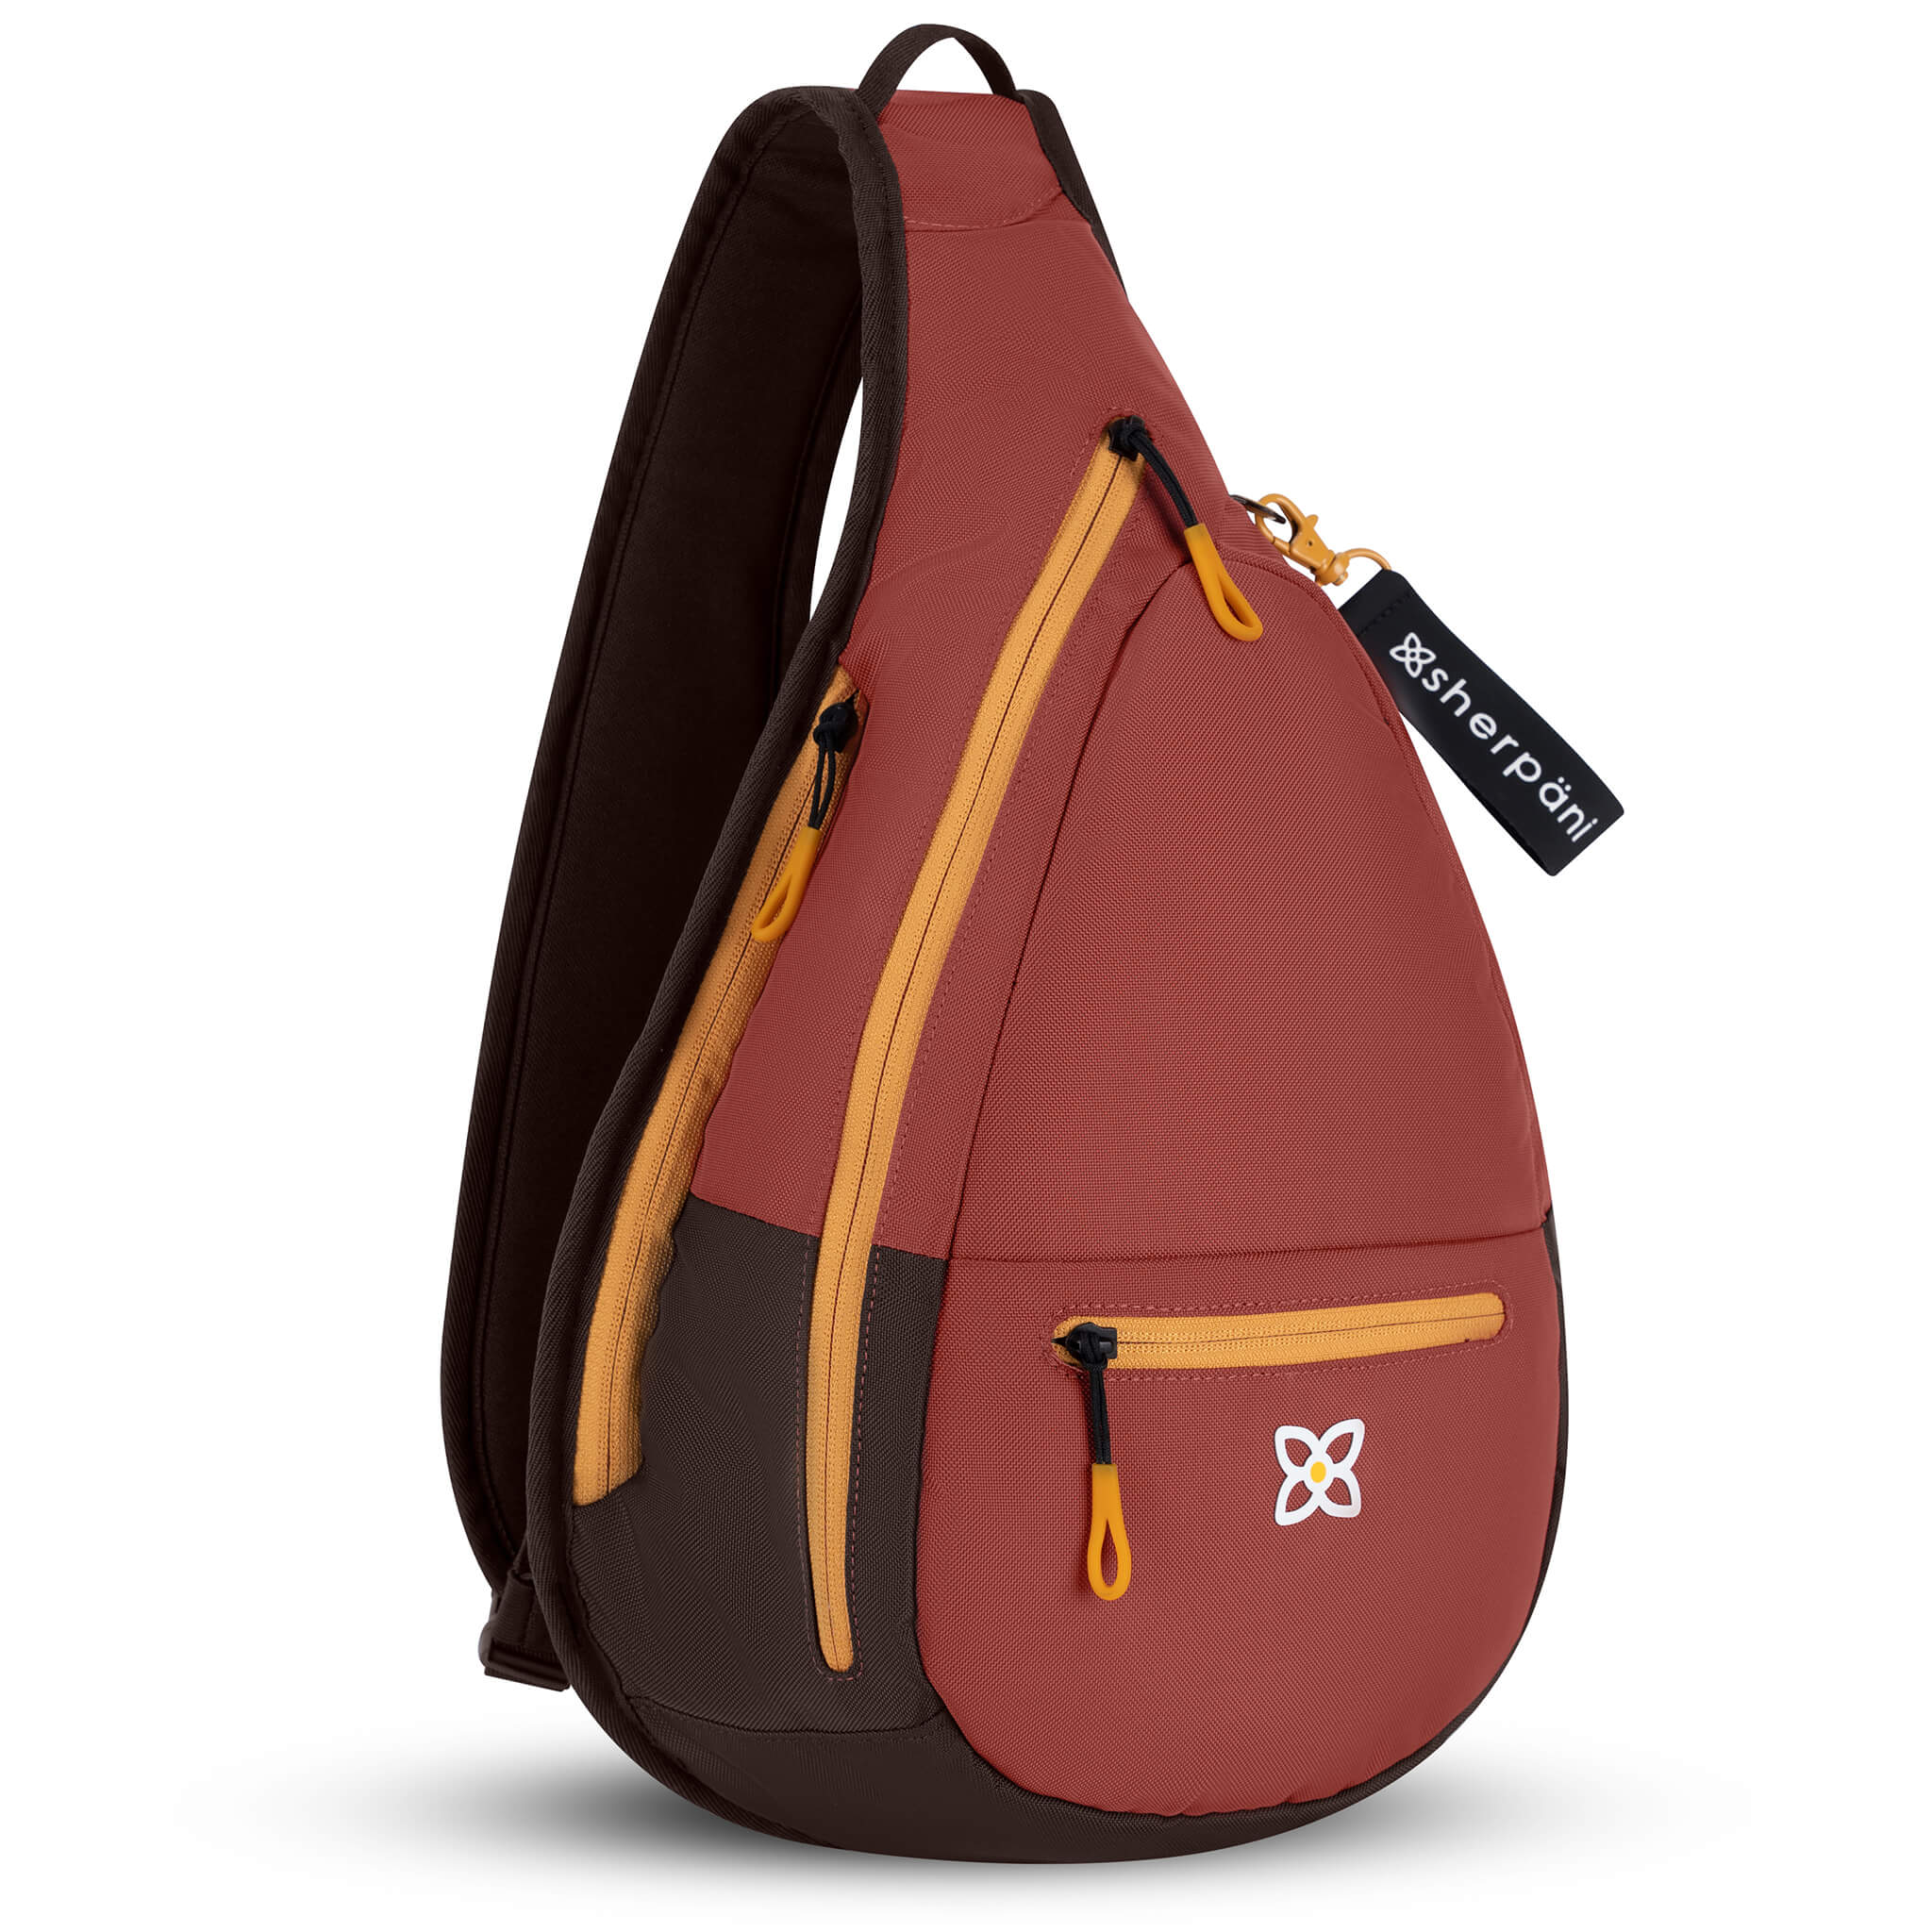 Angled front view of Sherpani sling backpack for women, the Esprit in Cider. Esprit features include front zipper pocket, side zipper pocket, inside mesh pocket, RFID blocking, detachable key chain and an adjustable sling strap. The Cider color is two-toned in burgundy and dark brown with yellow accents. #color_cider